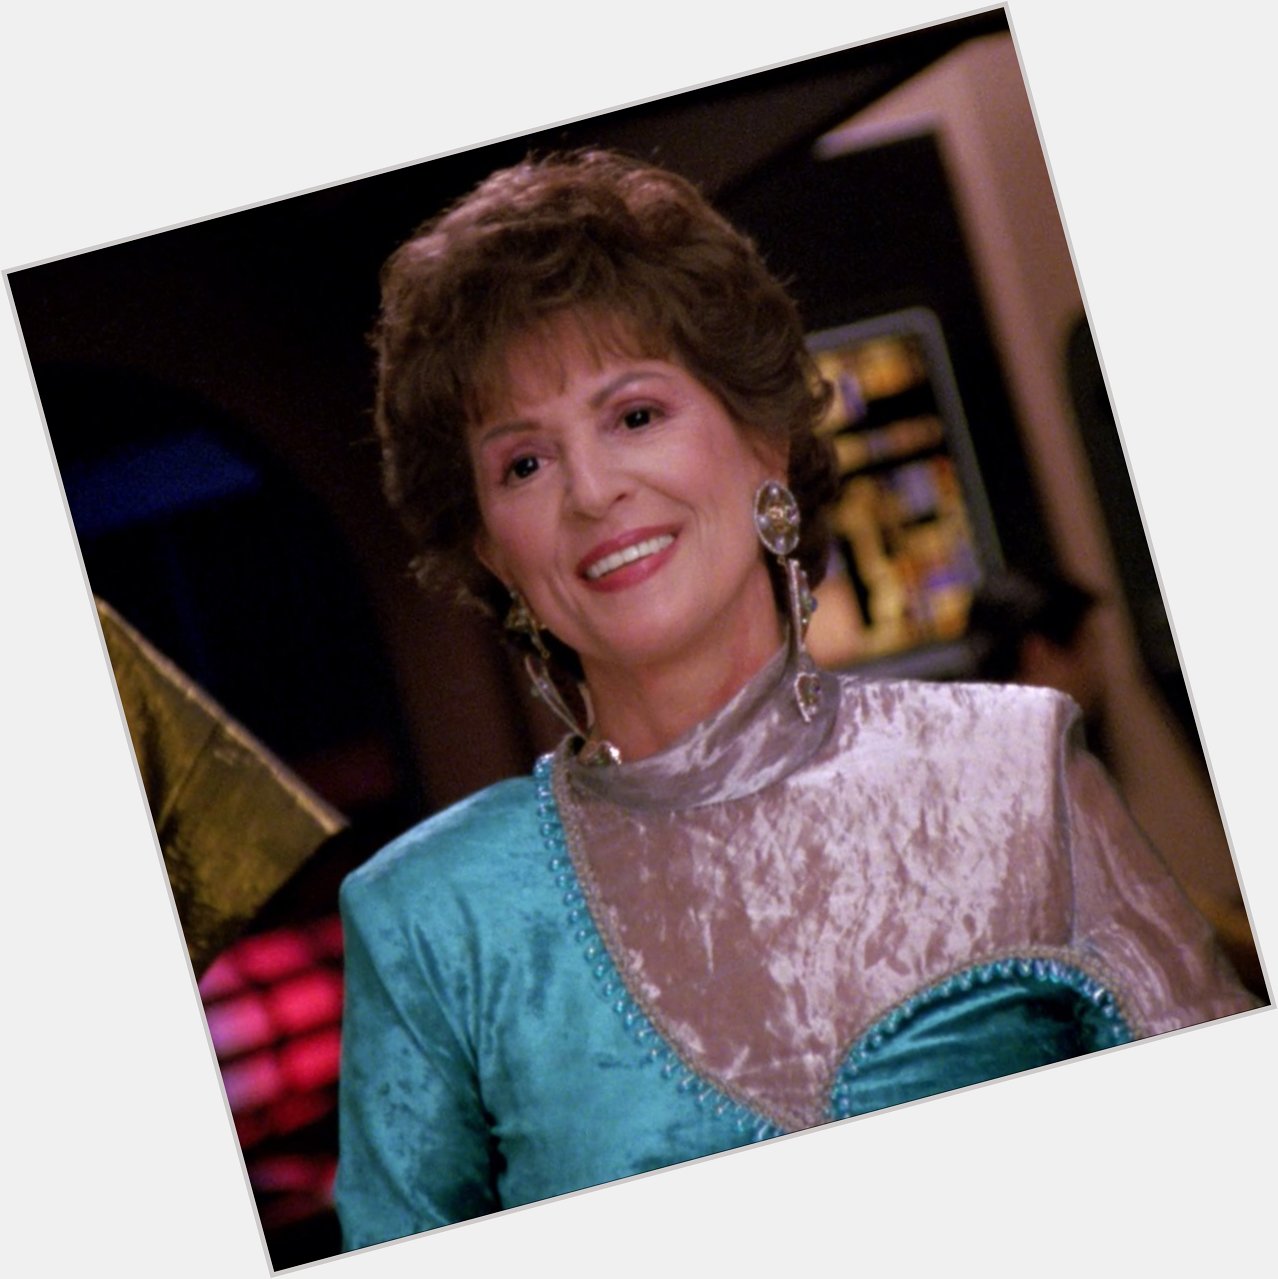 Wishing Majel Barrett-Roddenberry a happy birthday on what would have been her 90th birthday   